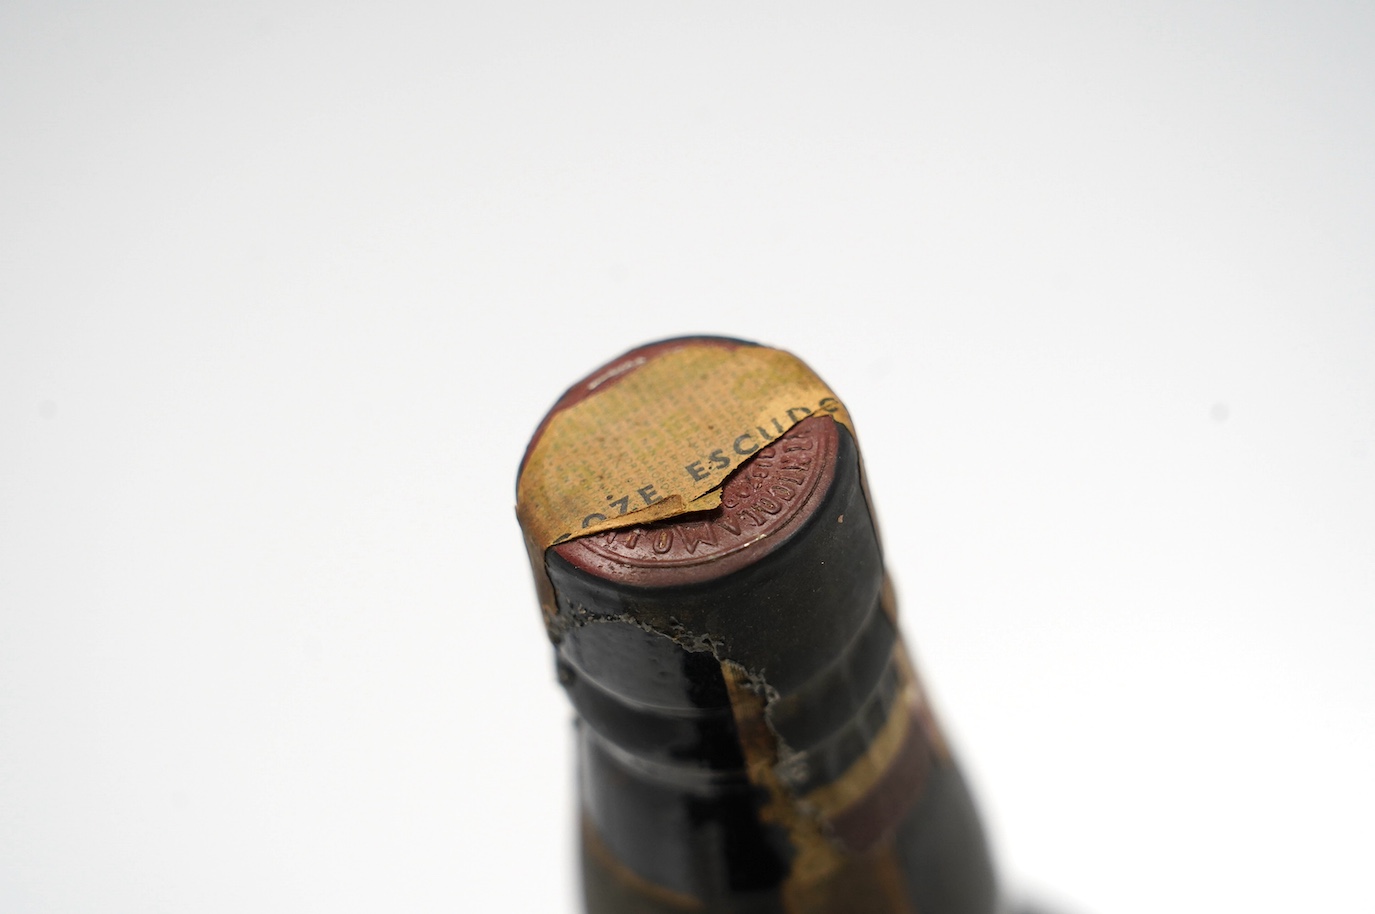 A bottle of 1927 Garrafeira port. Condition - sealed, some damage to labels, but contents unknown